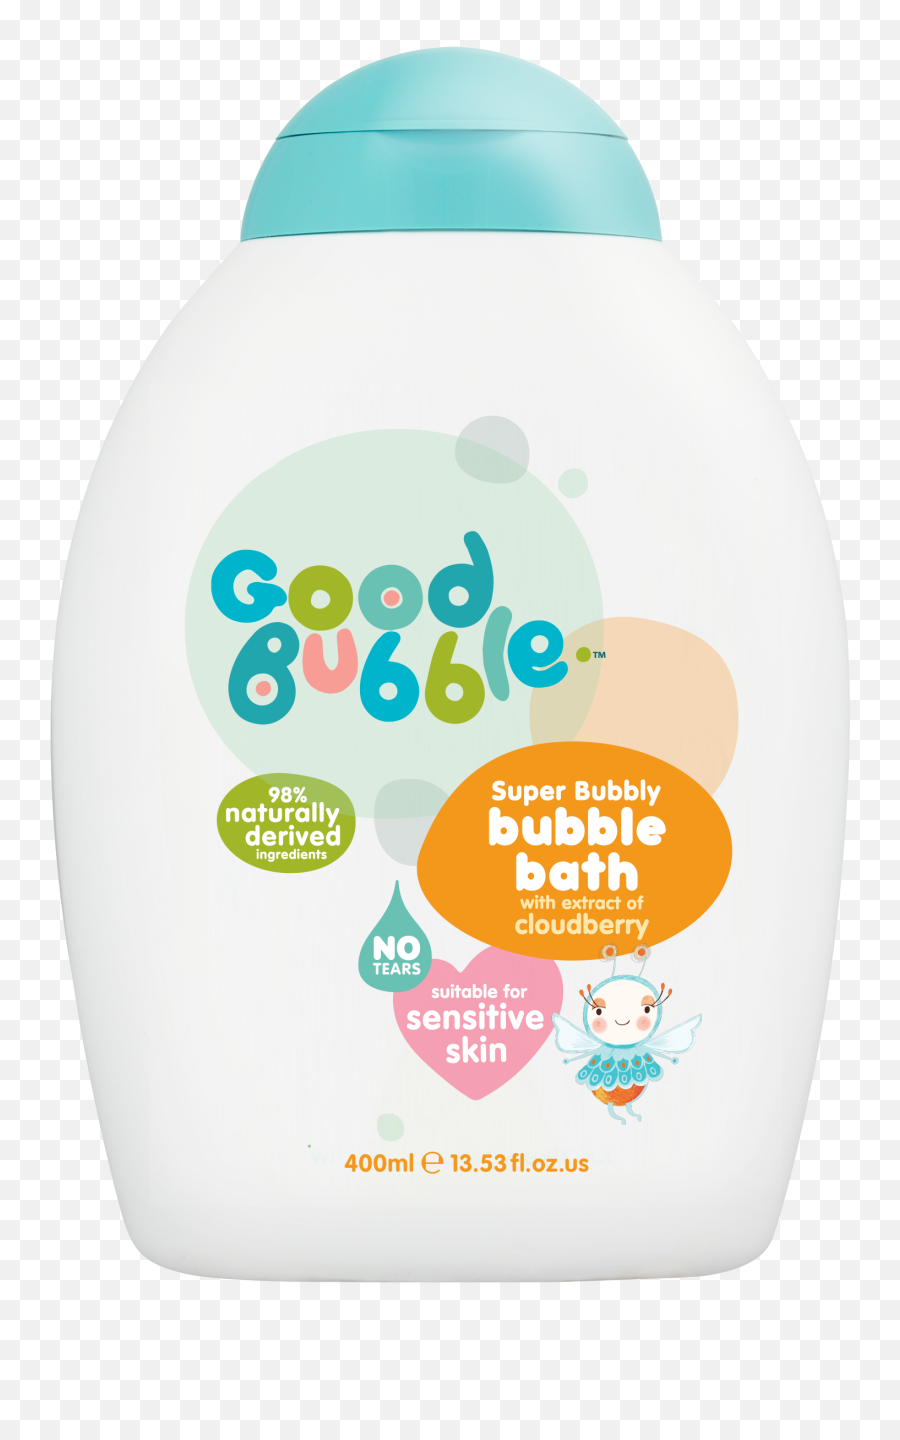 Bubble Bath With Cloudberry Extract 400ml - Household Supply Png,Bubble Bath Png